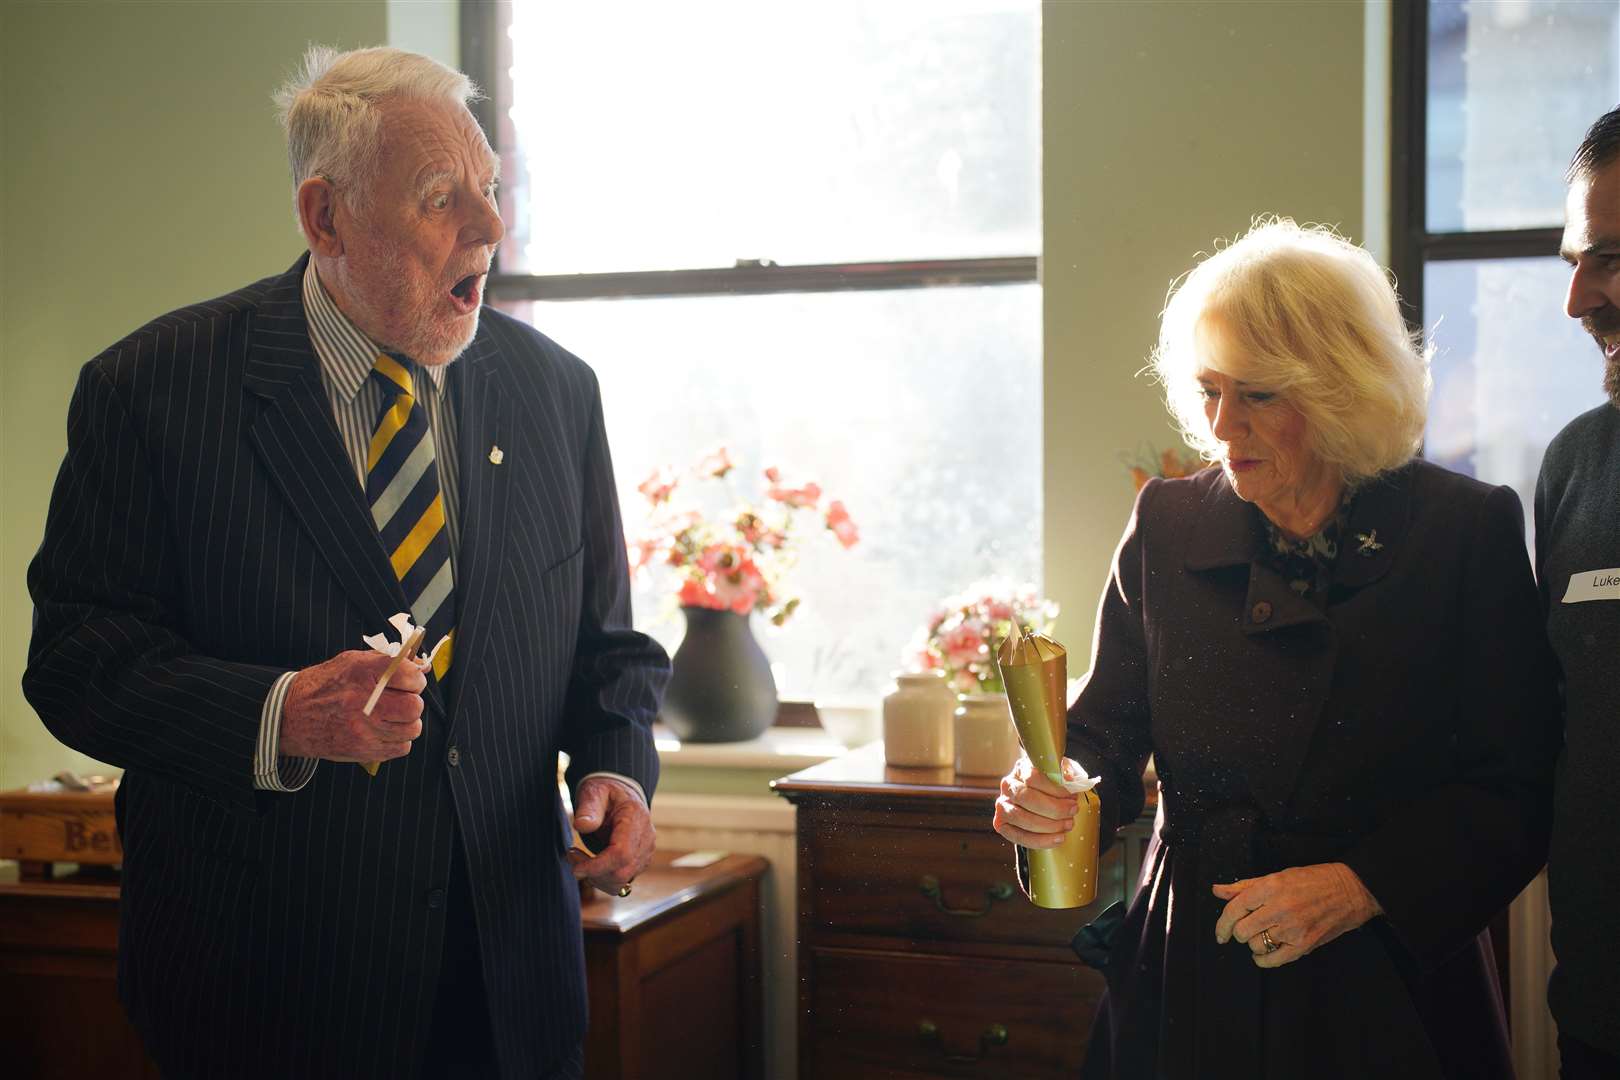 Camilla pulled a Christmas cracker with Emmaus UK patron Sir Terry Waite during her visit (Ben Birchall/PA)